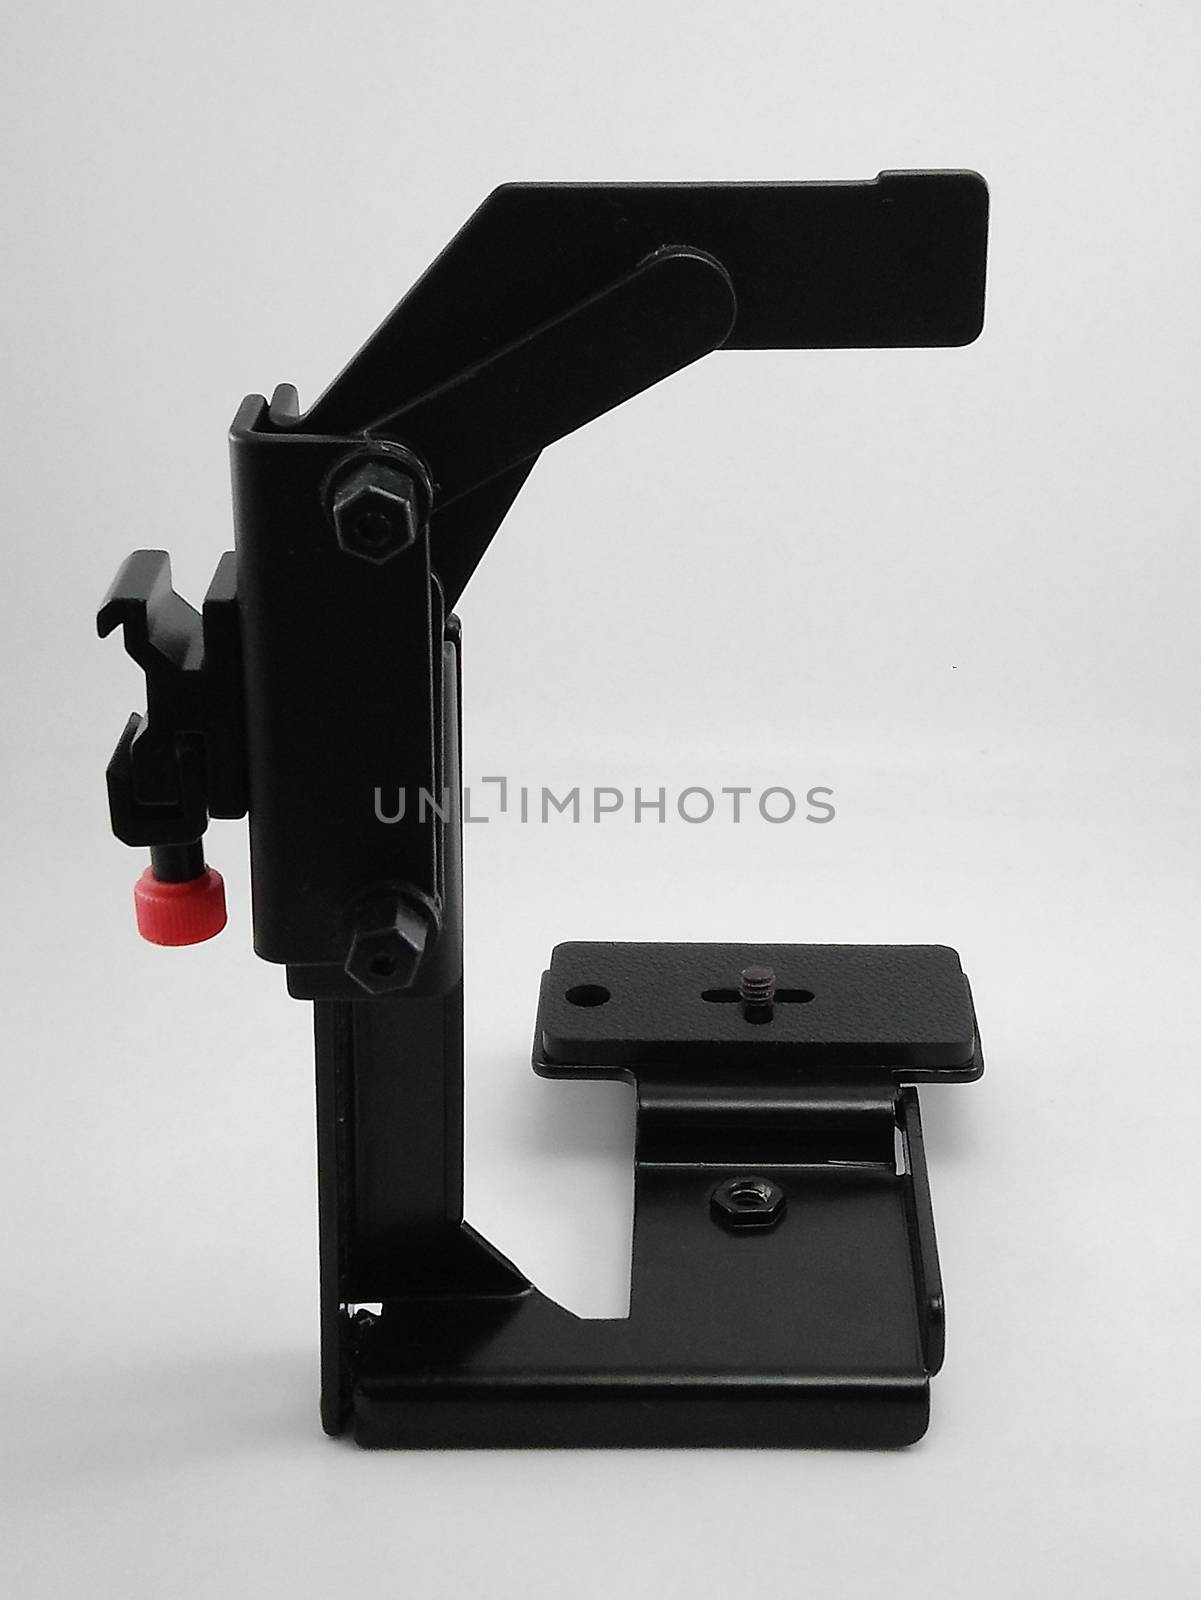 Black adjustable metal flash bracket photography accessory use to minimize the shadow of subject in portrait position